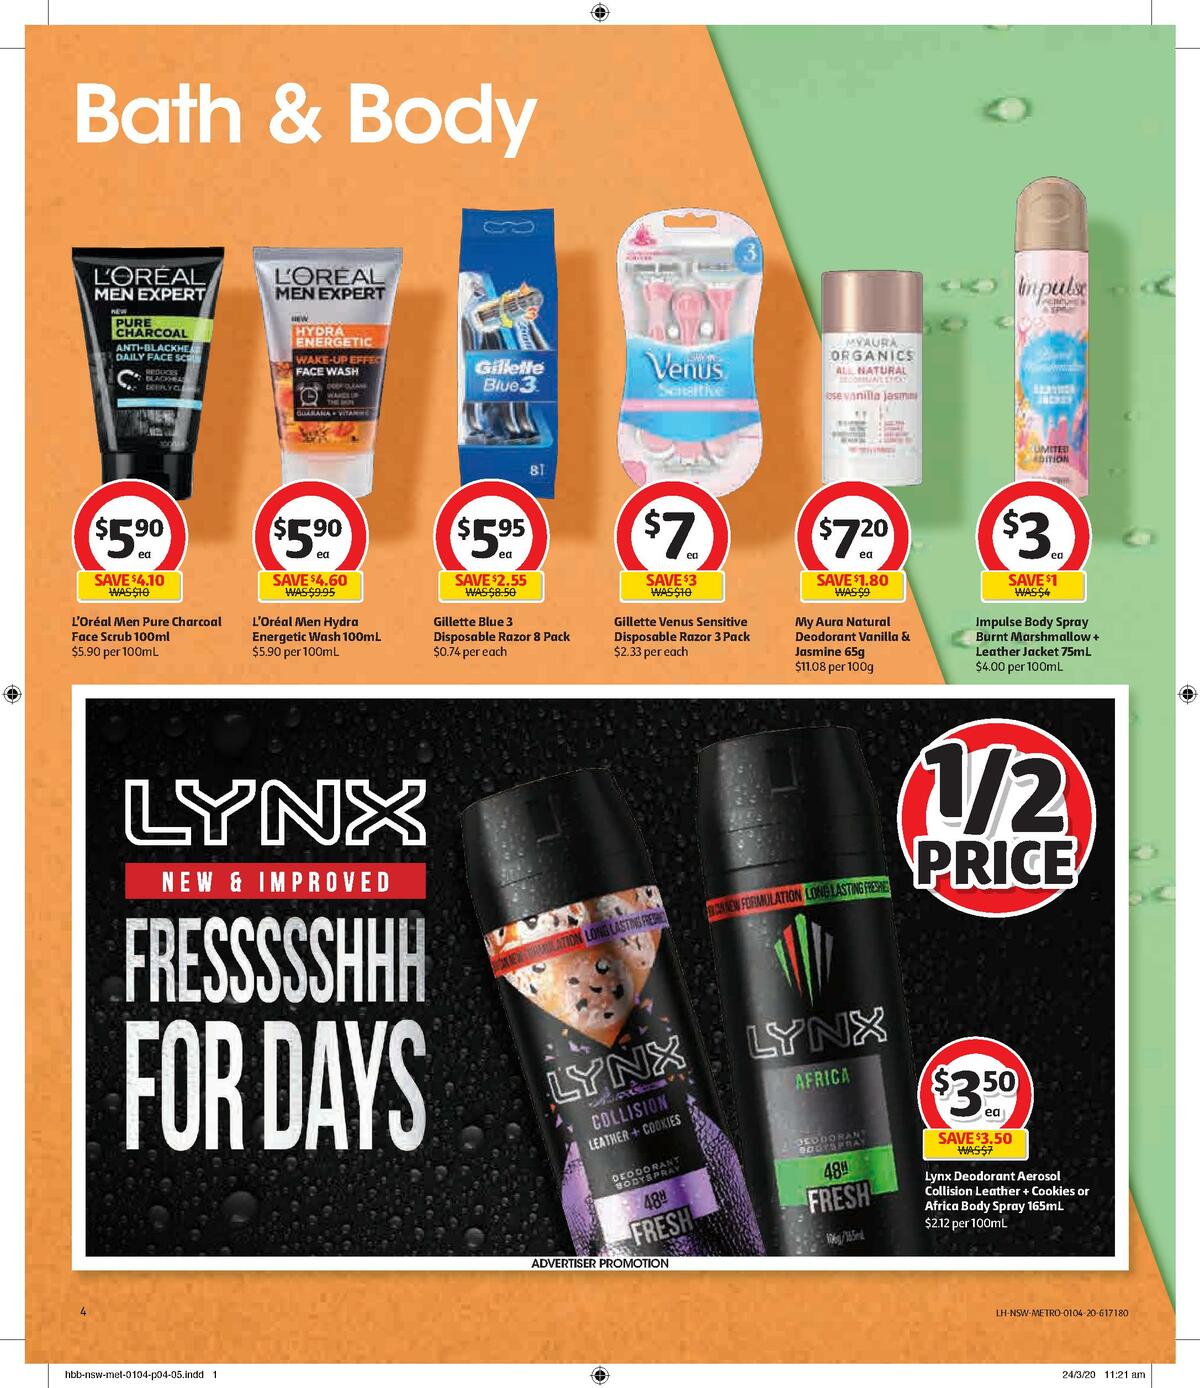 Coles Health & Beauty Catalogues from 1 April